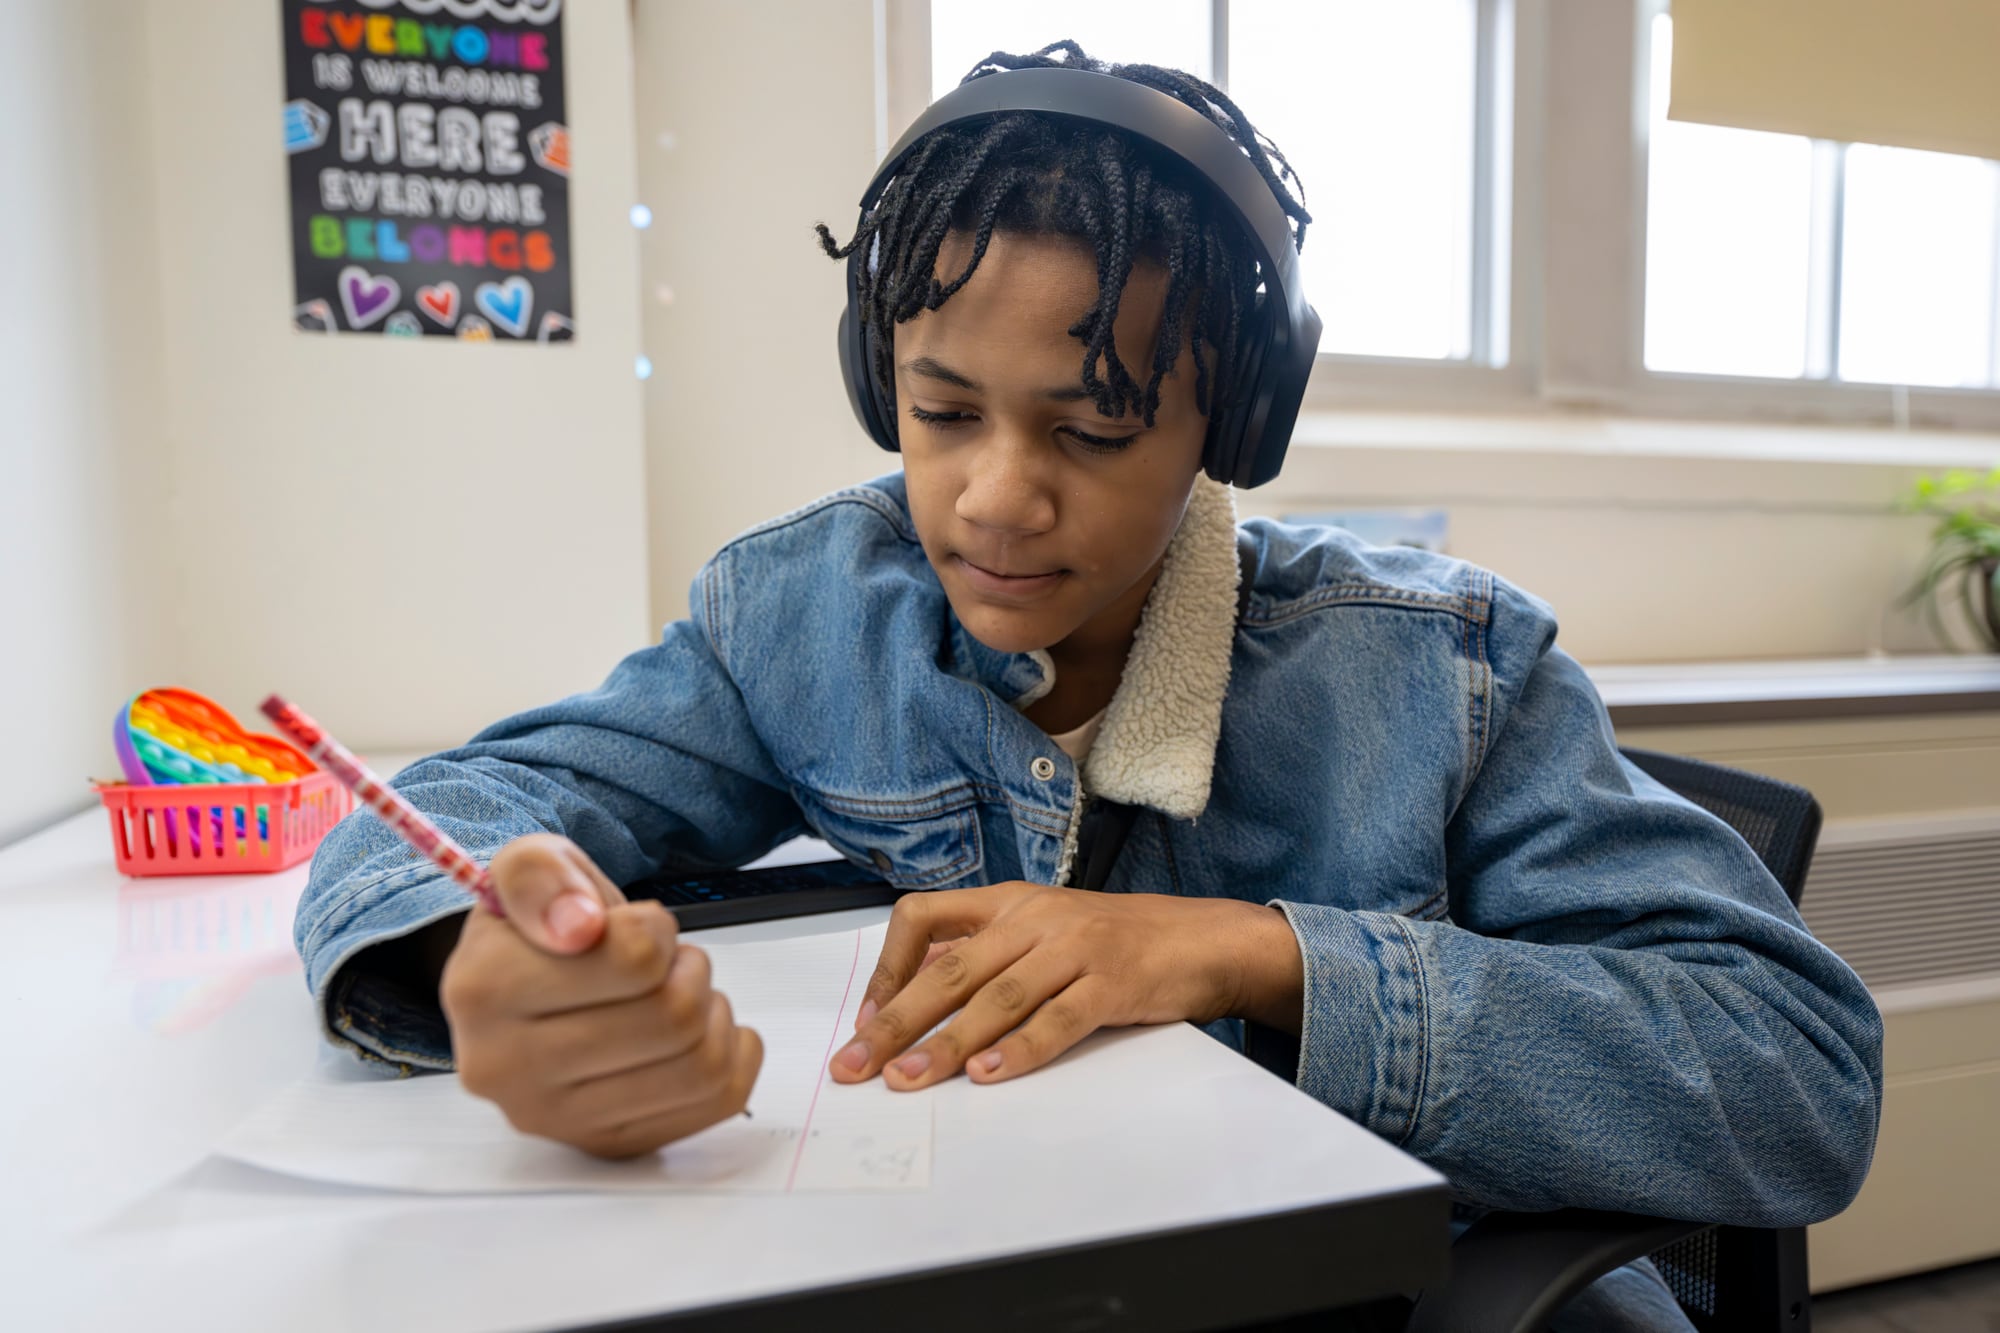 A boy wearing a jean jacket and headphones holds a pencil and writes